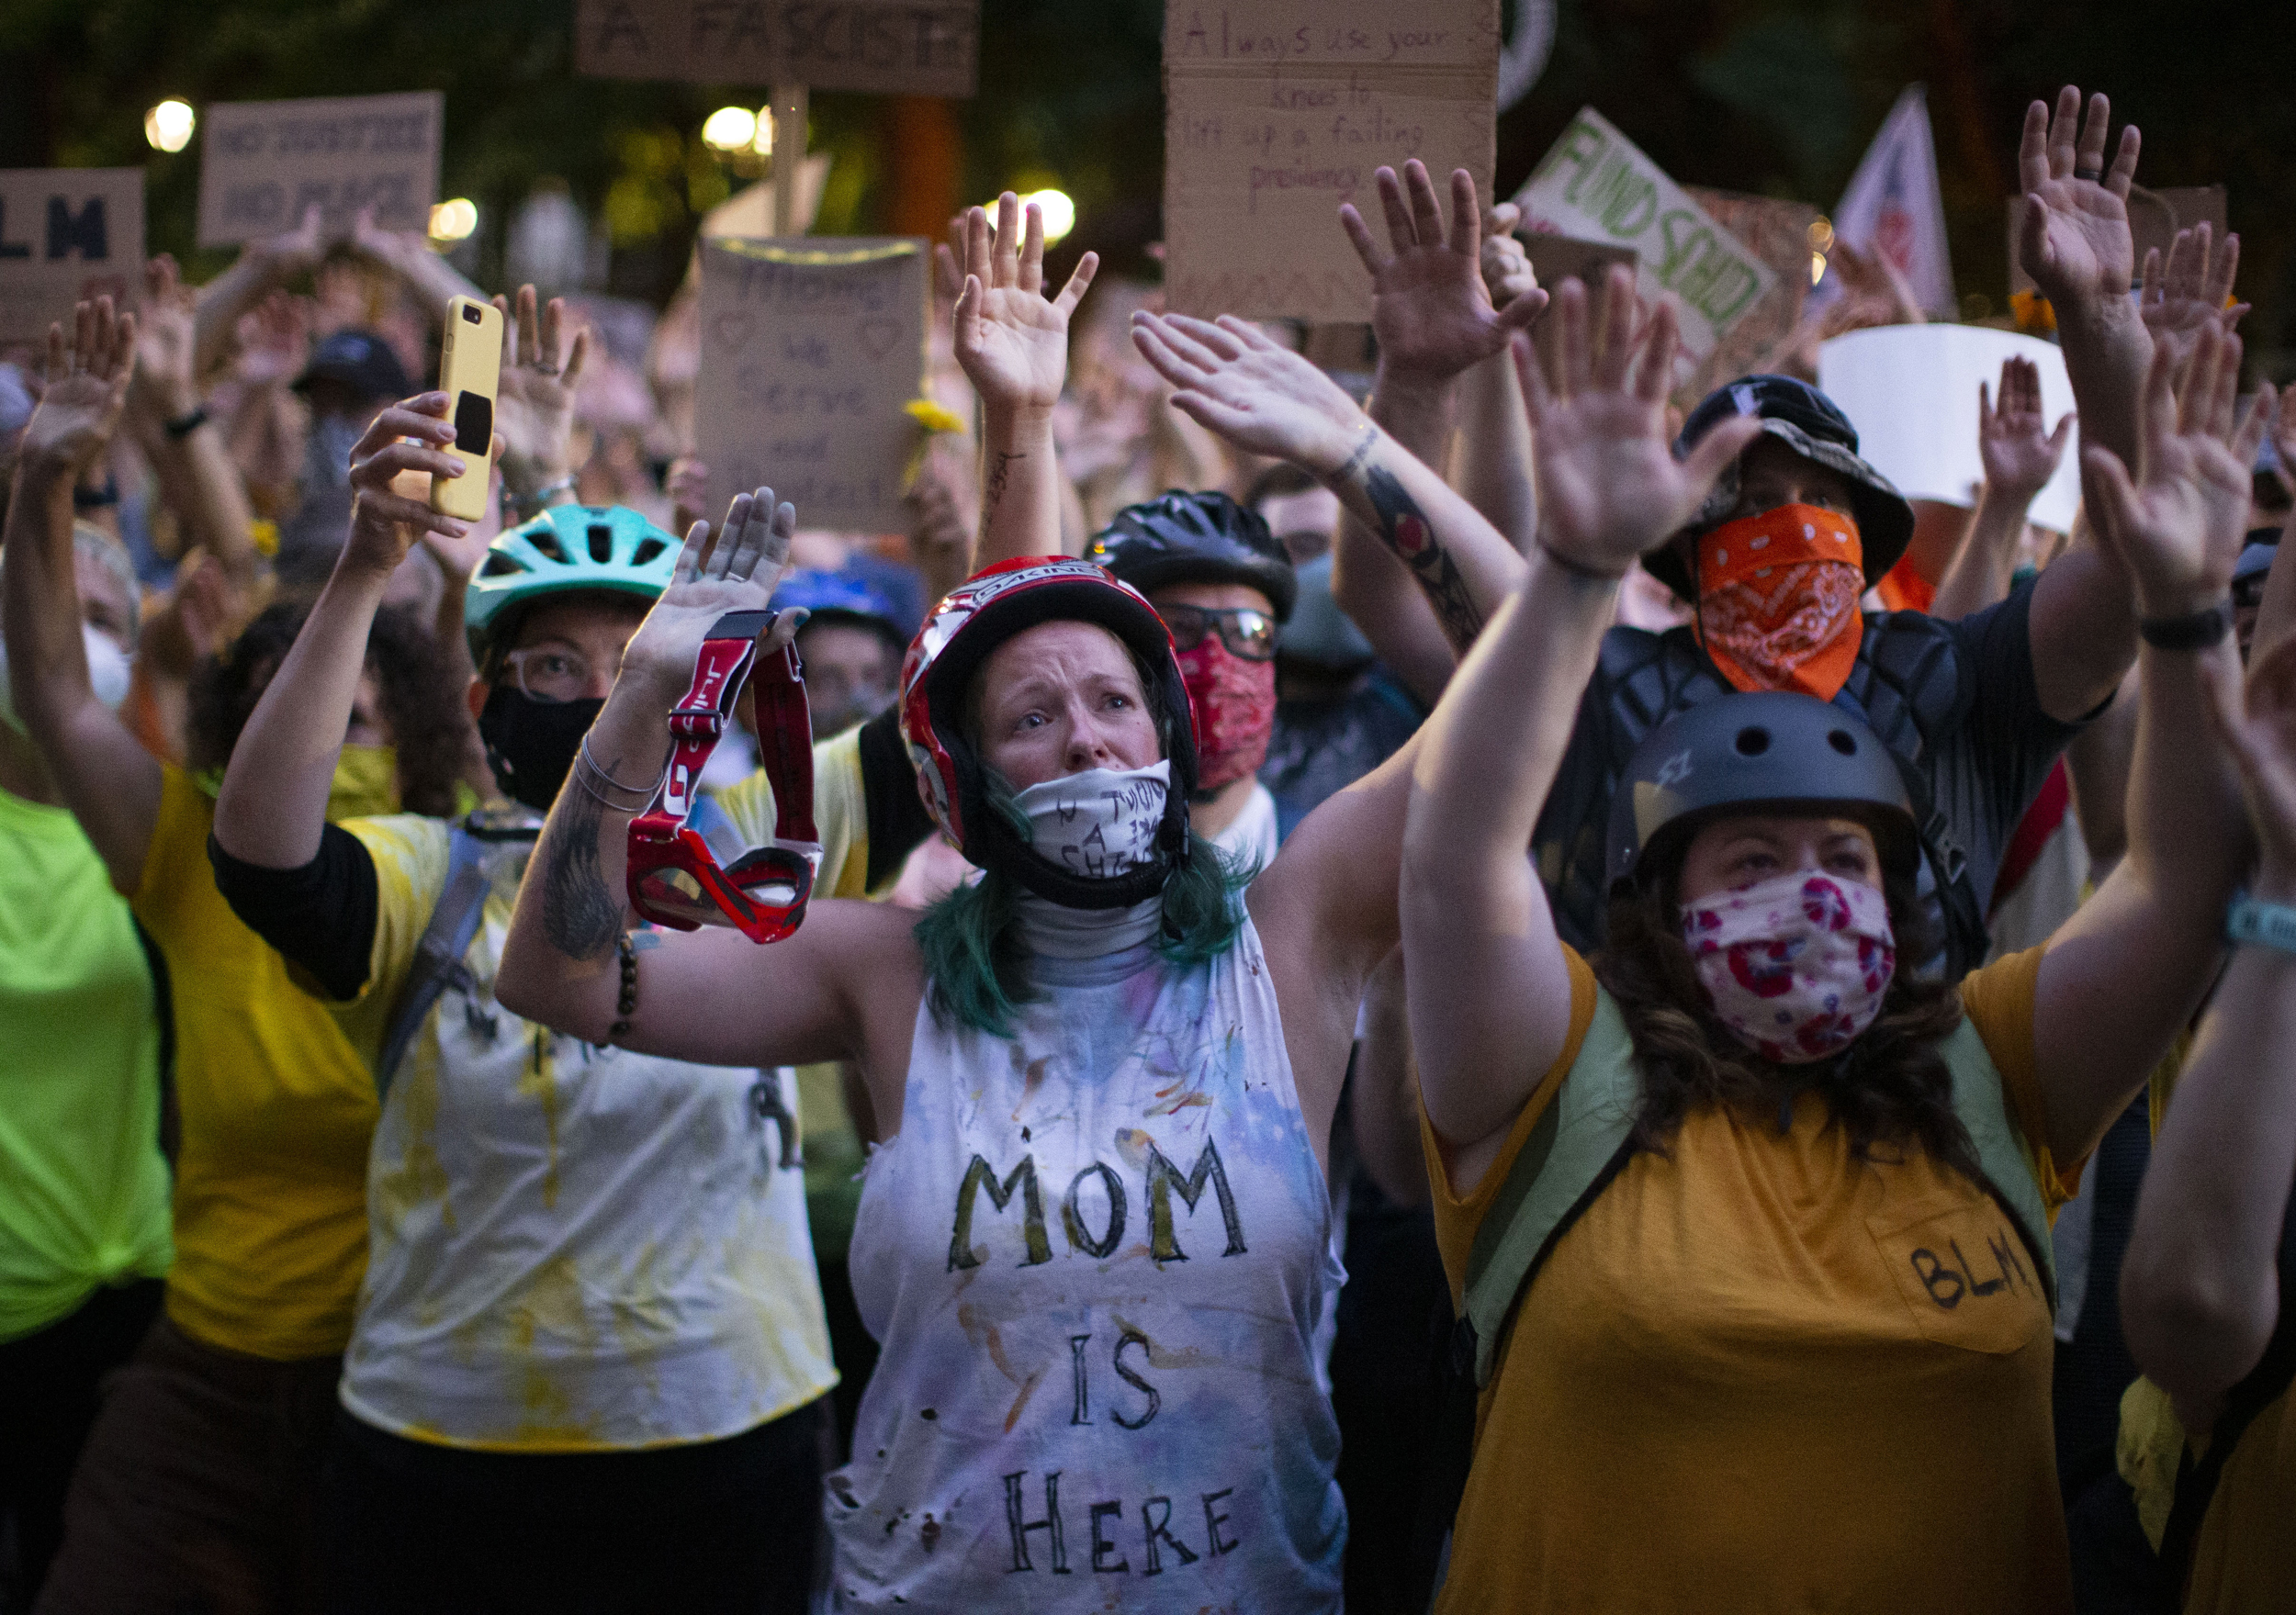 Protesters, including members of the "Wall of Moms" group, gather outside the Justice Center in Portland on July 20, 2020.